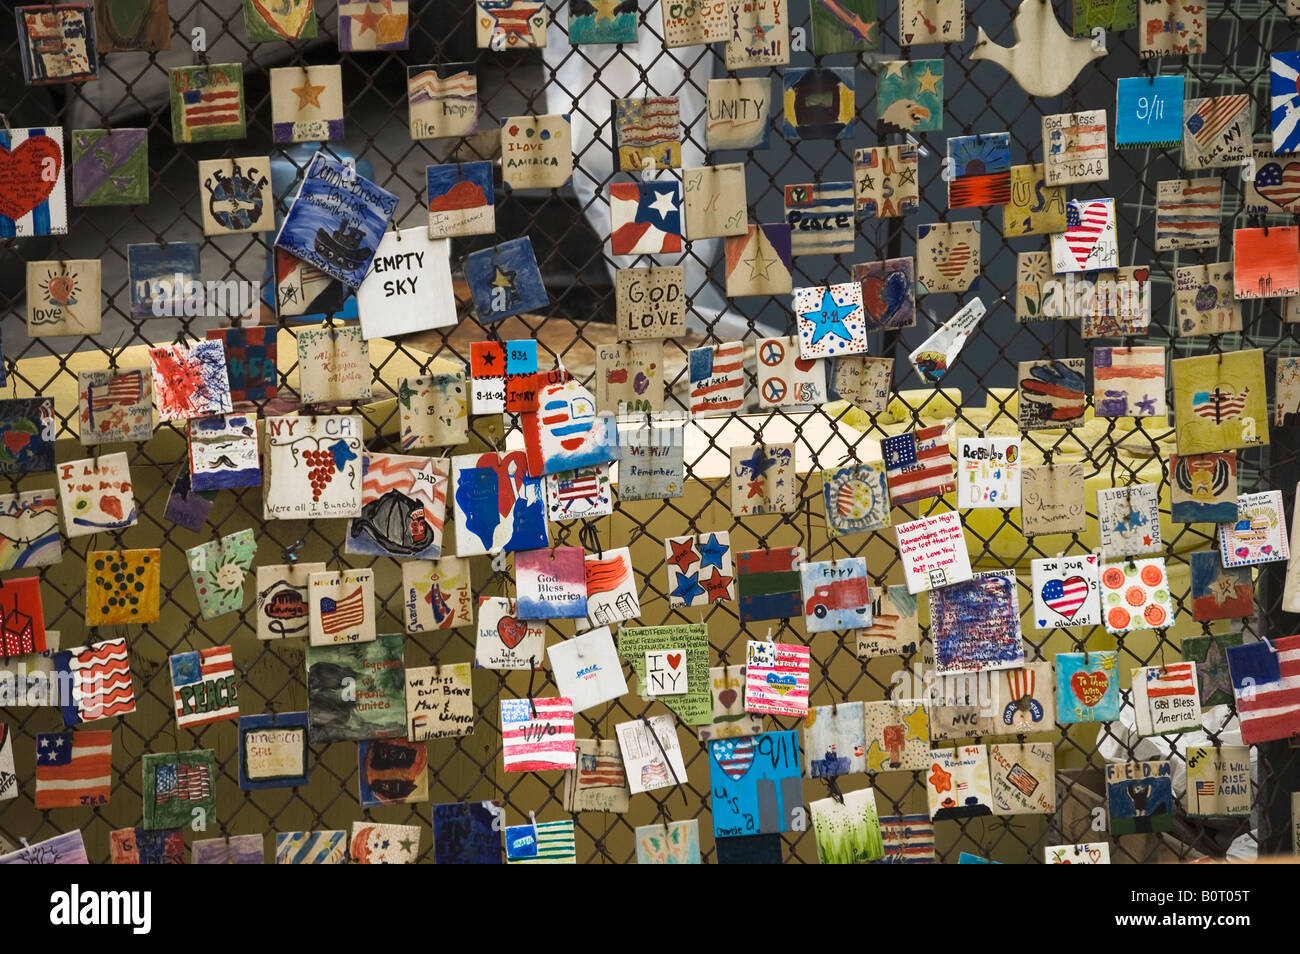 Tiles placed on a fence near ground zero new york that act as a memorial to the site. Stock Photo